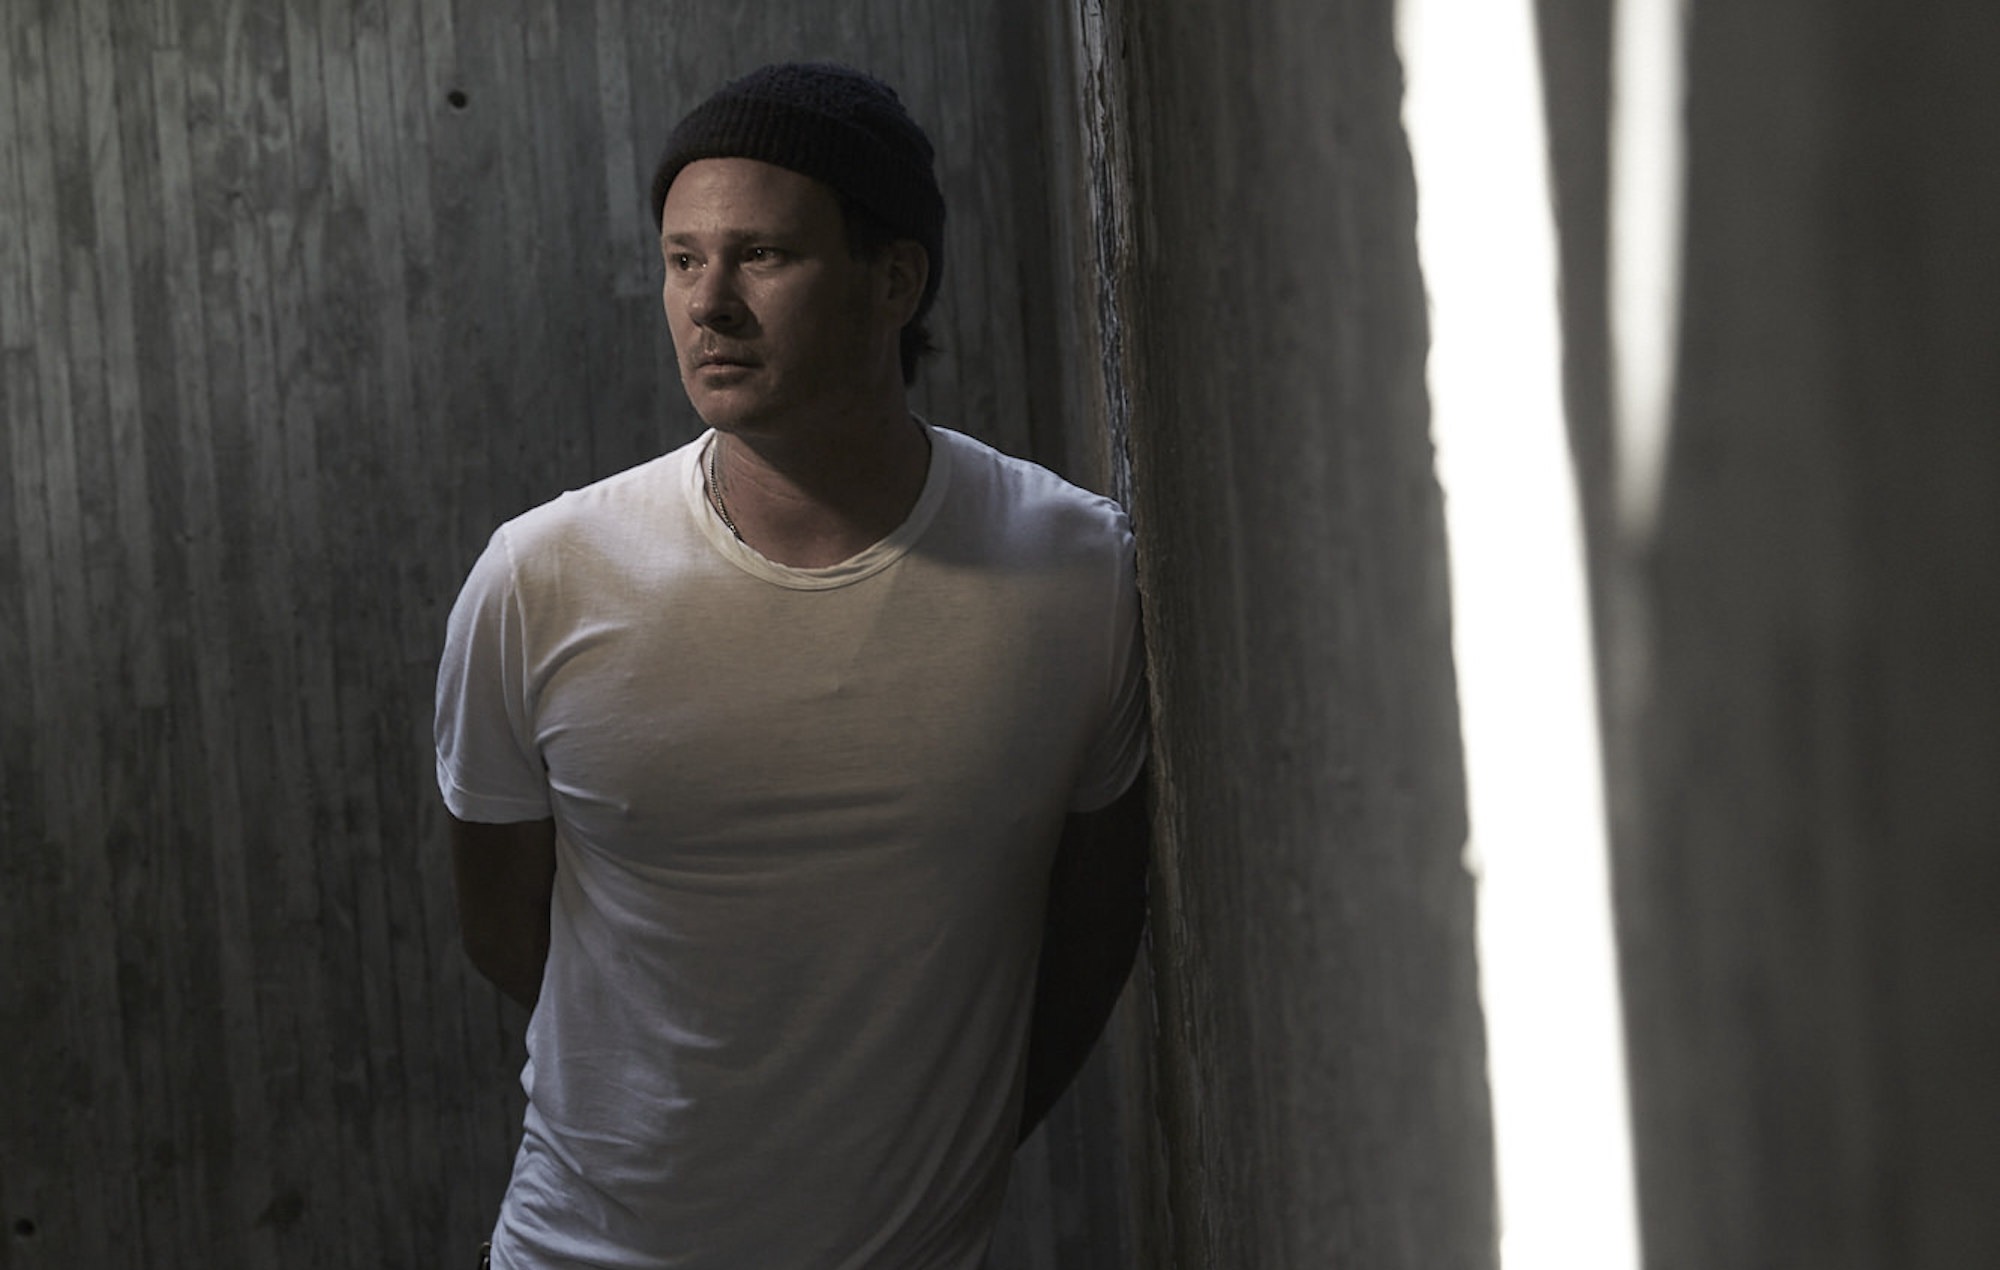 Five things we learned from our In Conversation video chat with Tom DeLonge